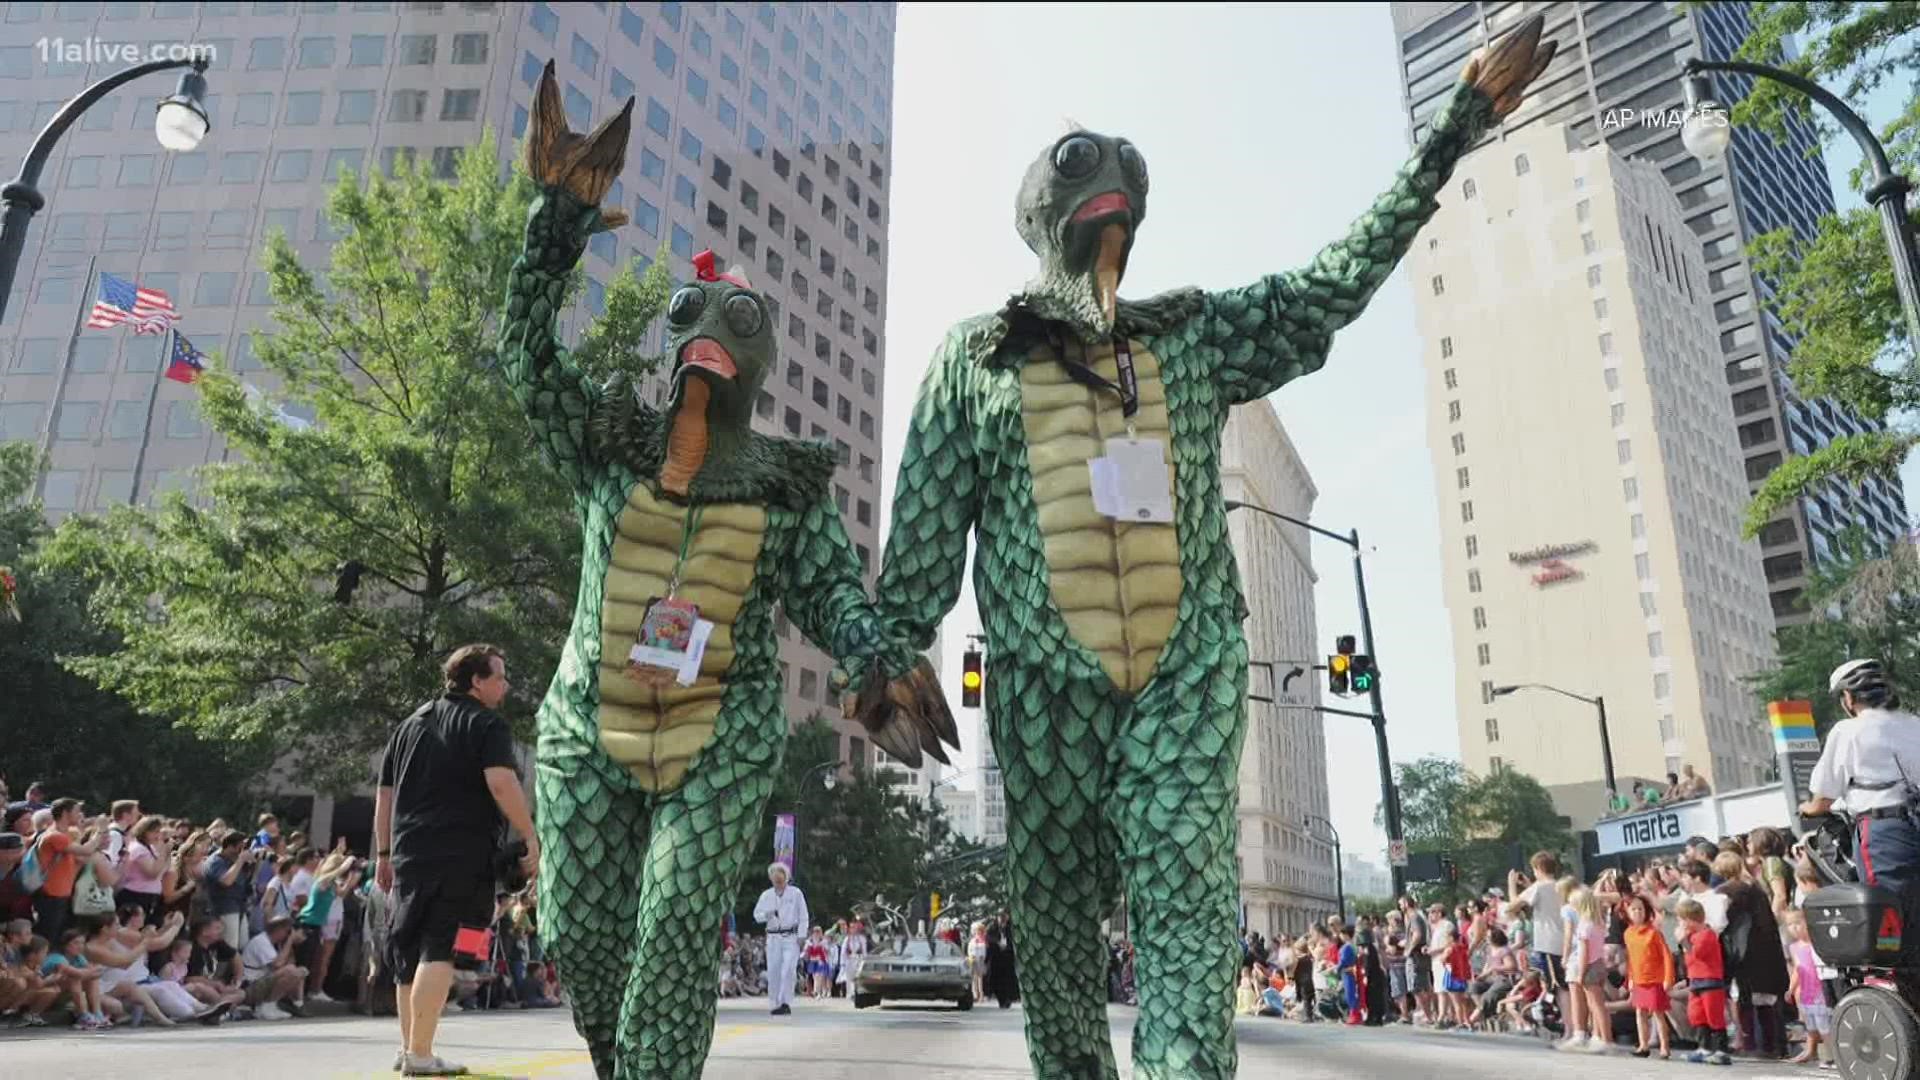 Dragon Con returns to Atlanta with changes